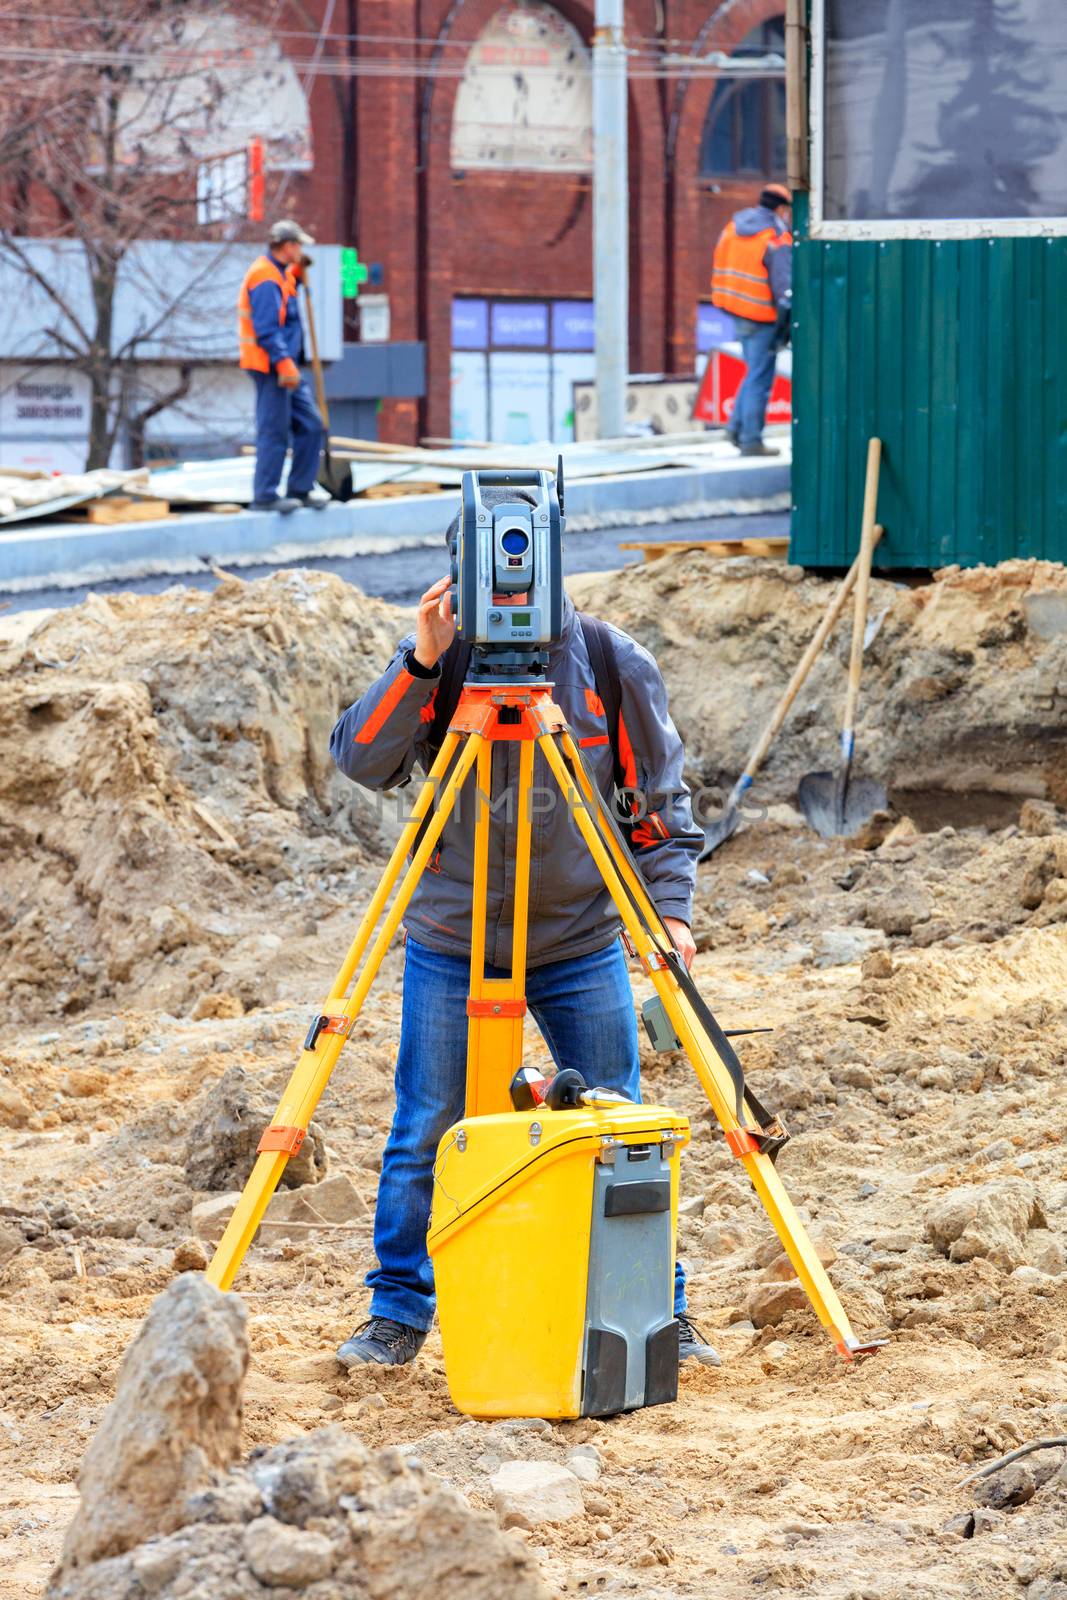 The road engineer uses the laser level to determine the required angle of inclination of the road section under construction.